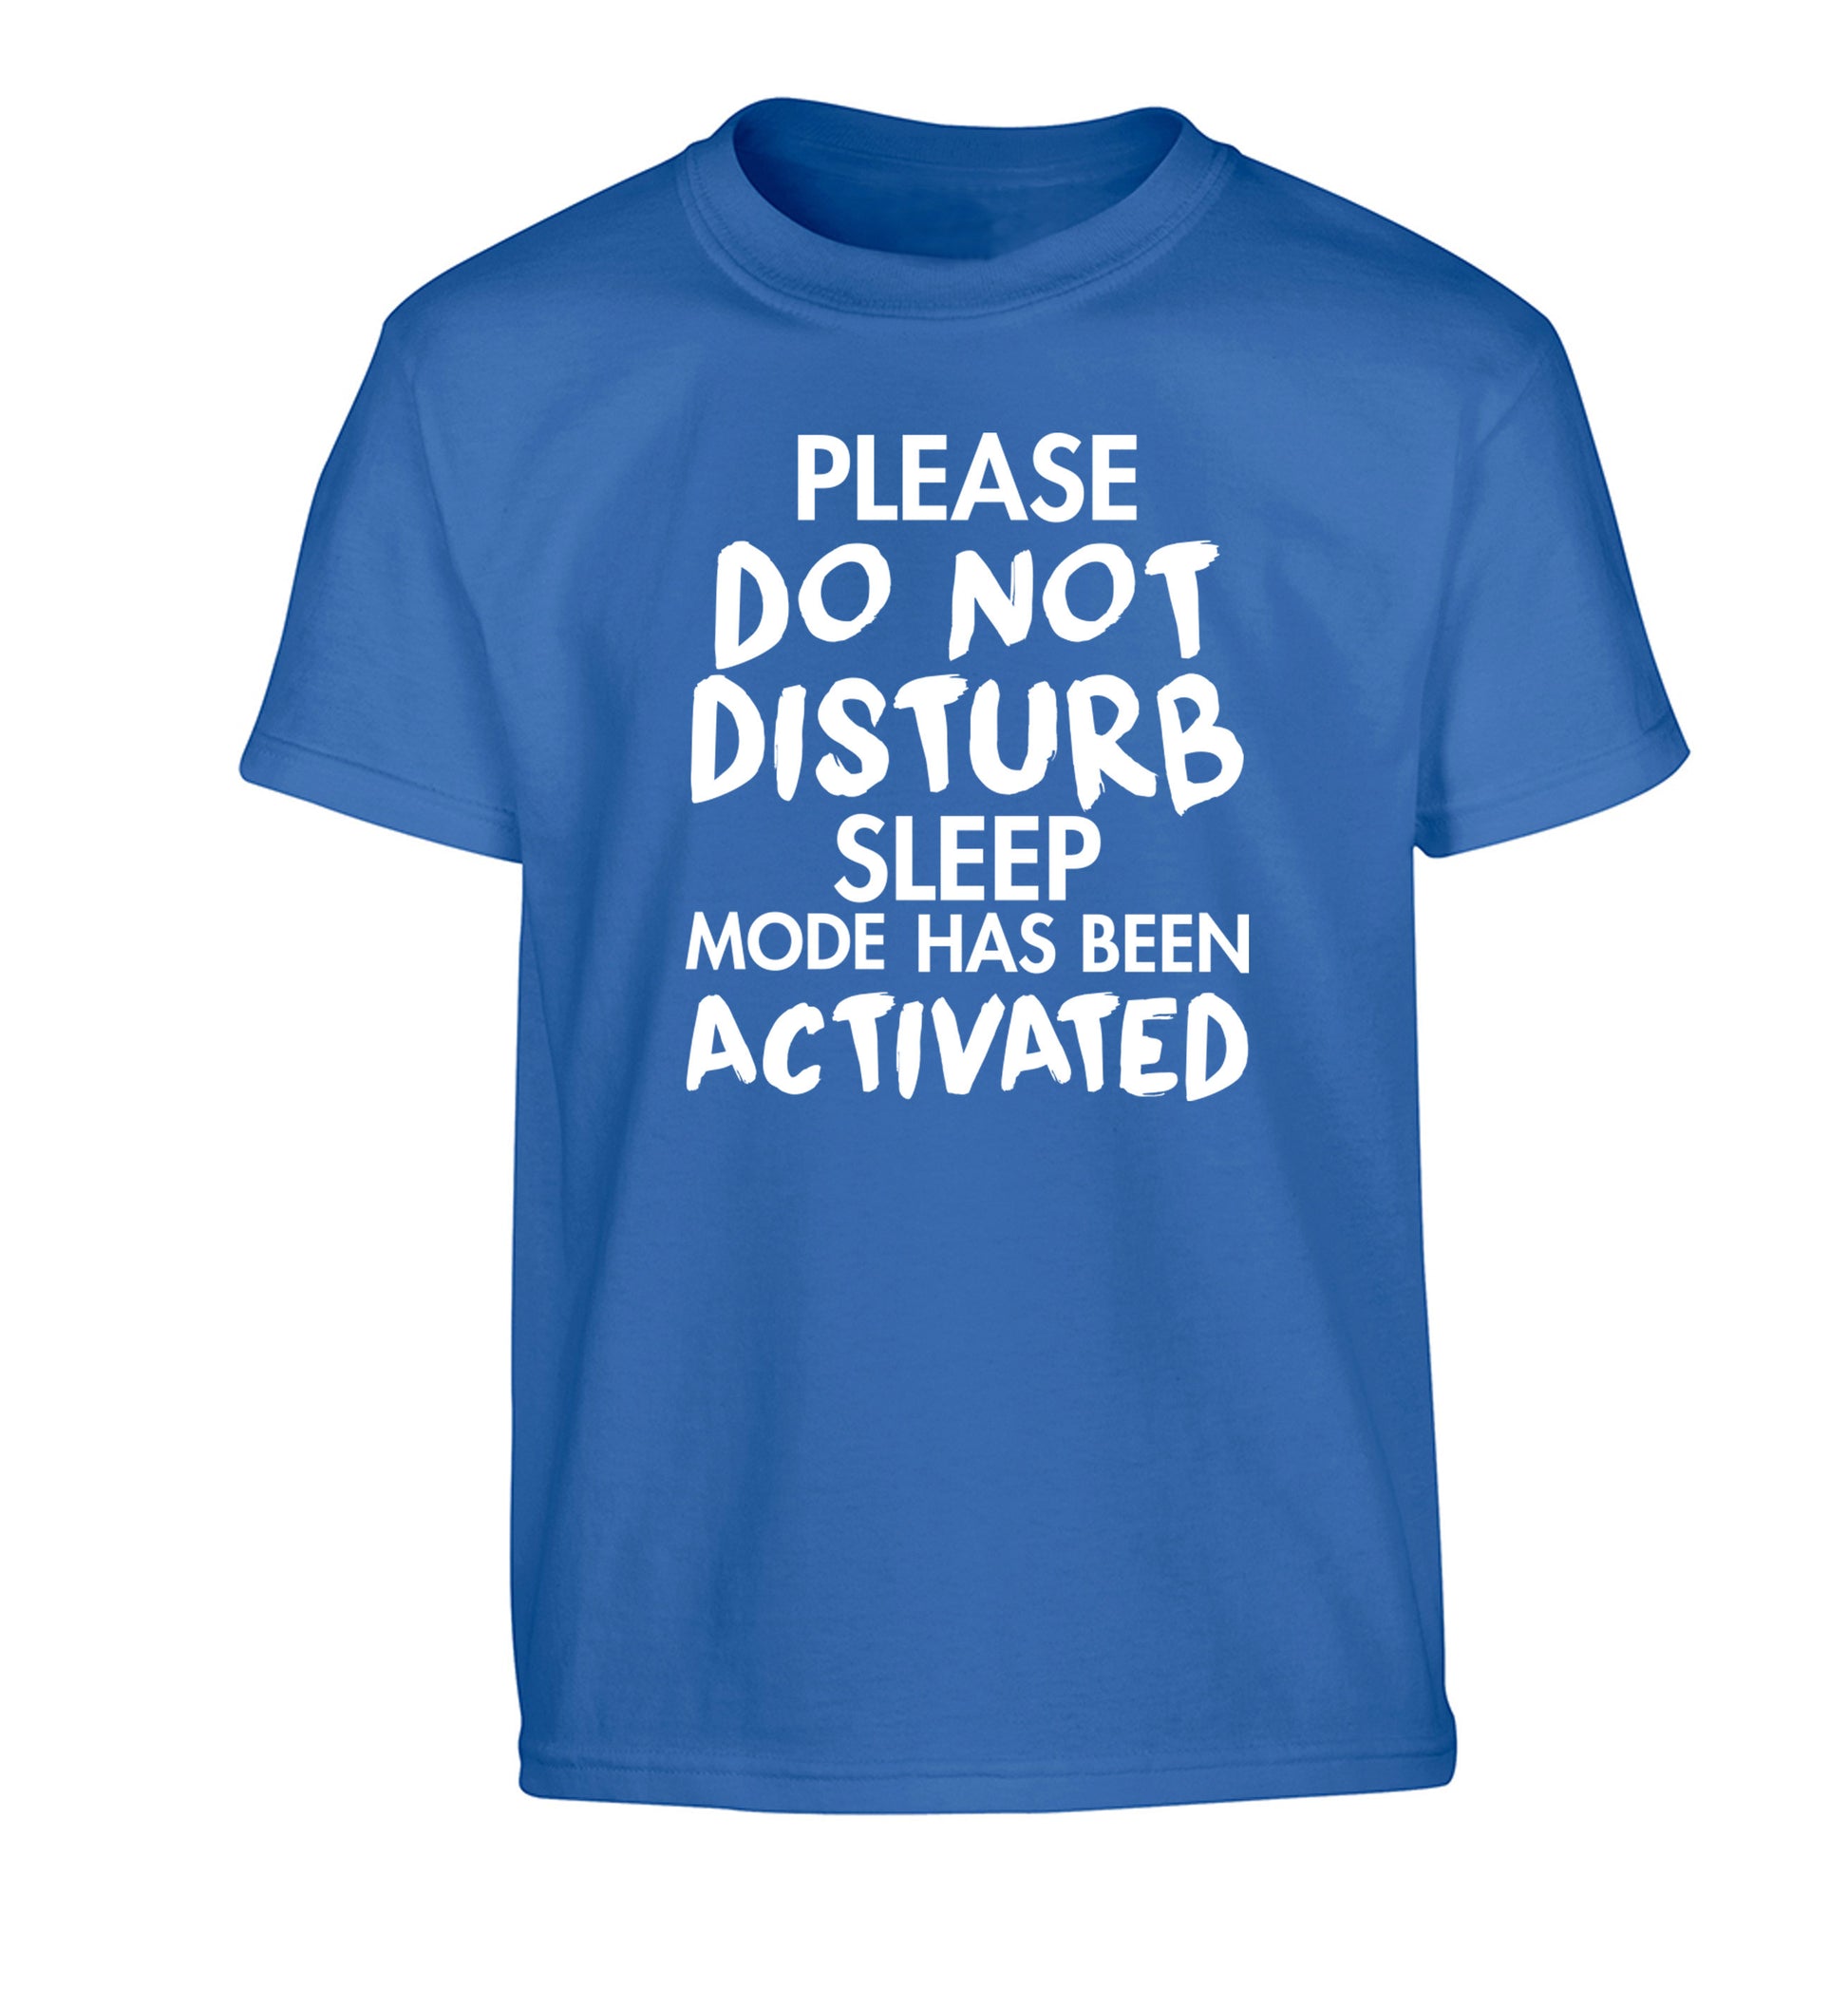 Please do not disturb sleeping mode has been activated Children's blue Tshirt 12-14 Years